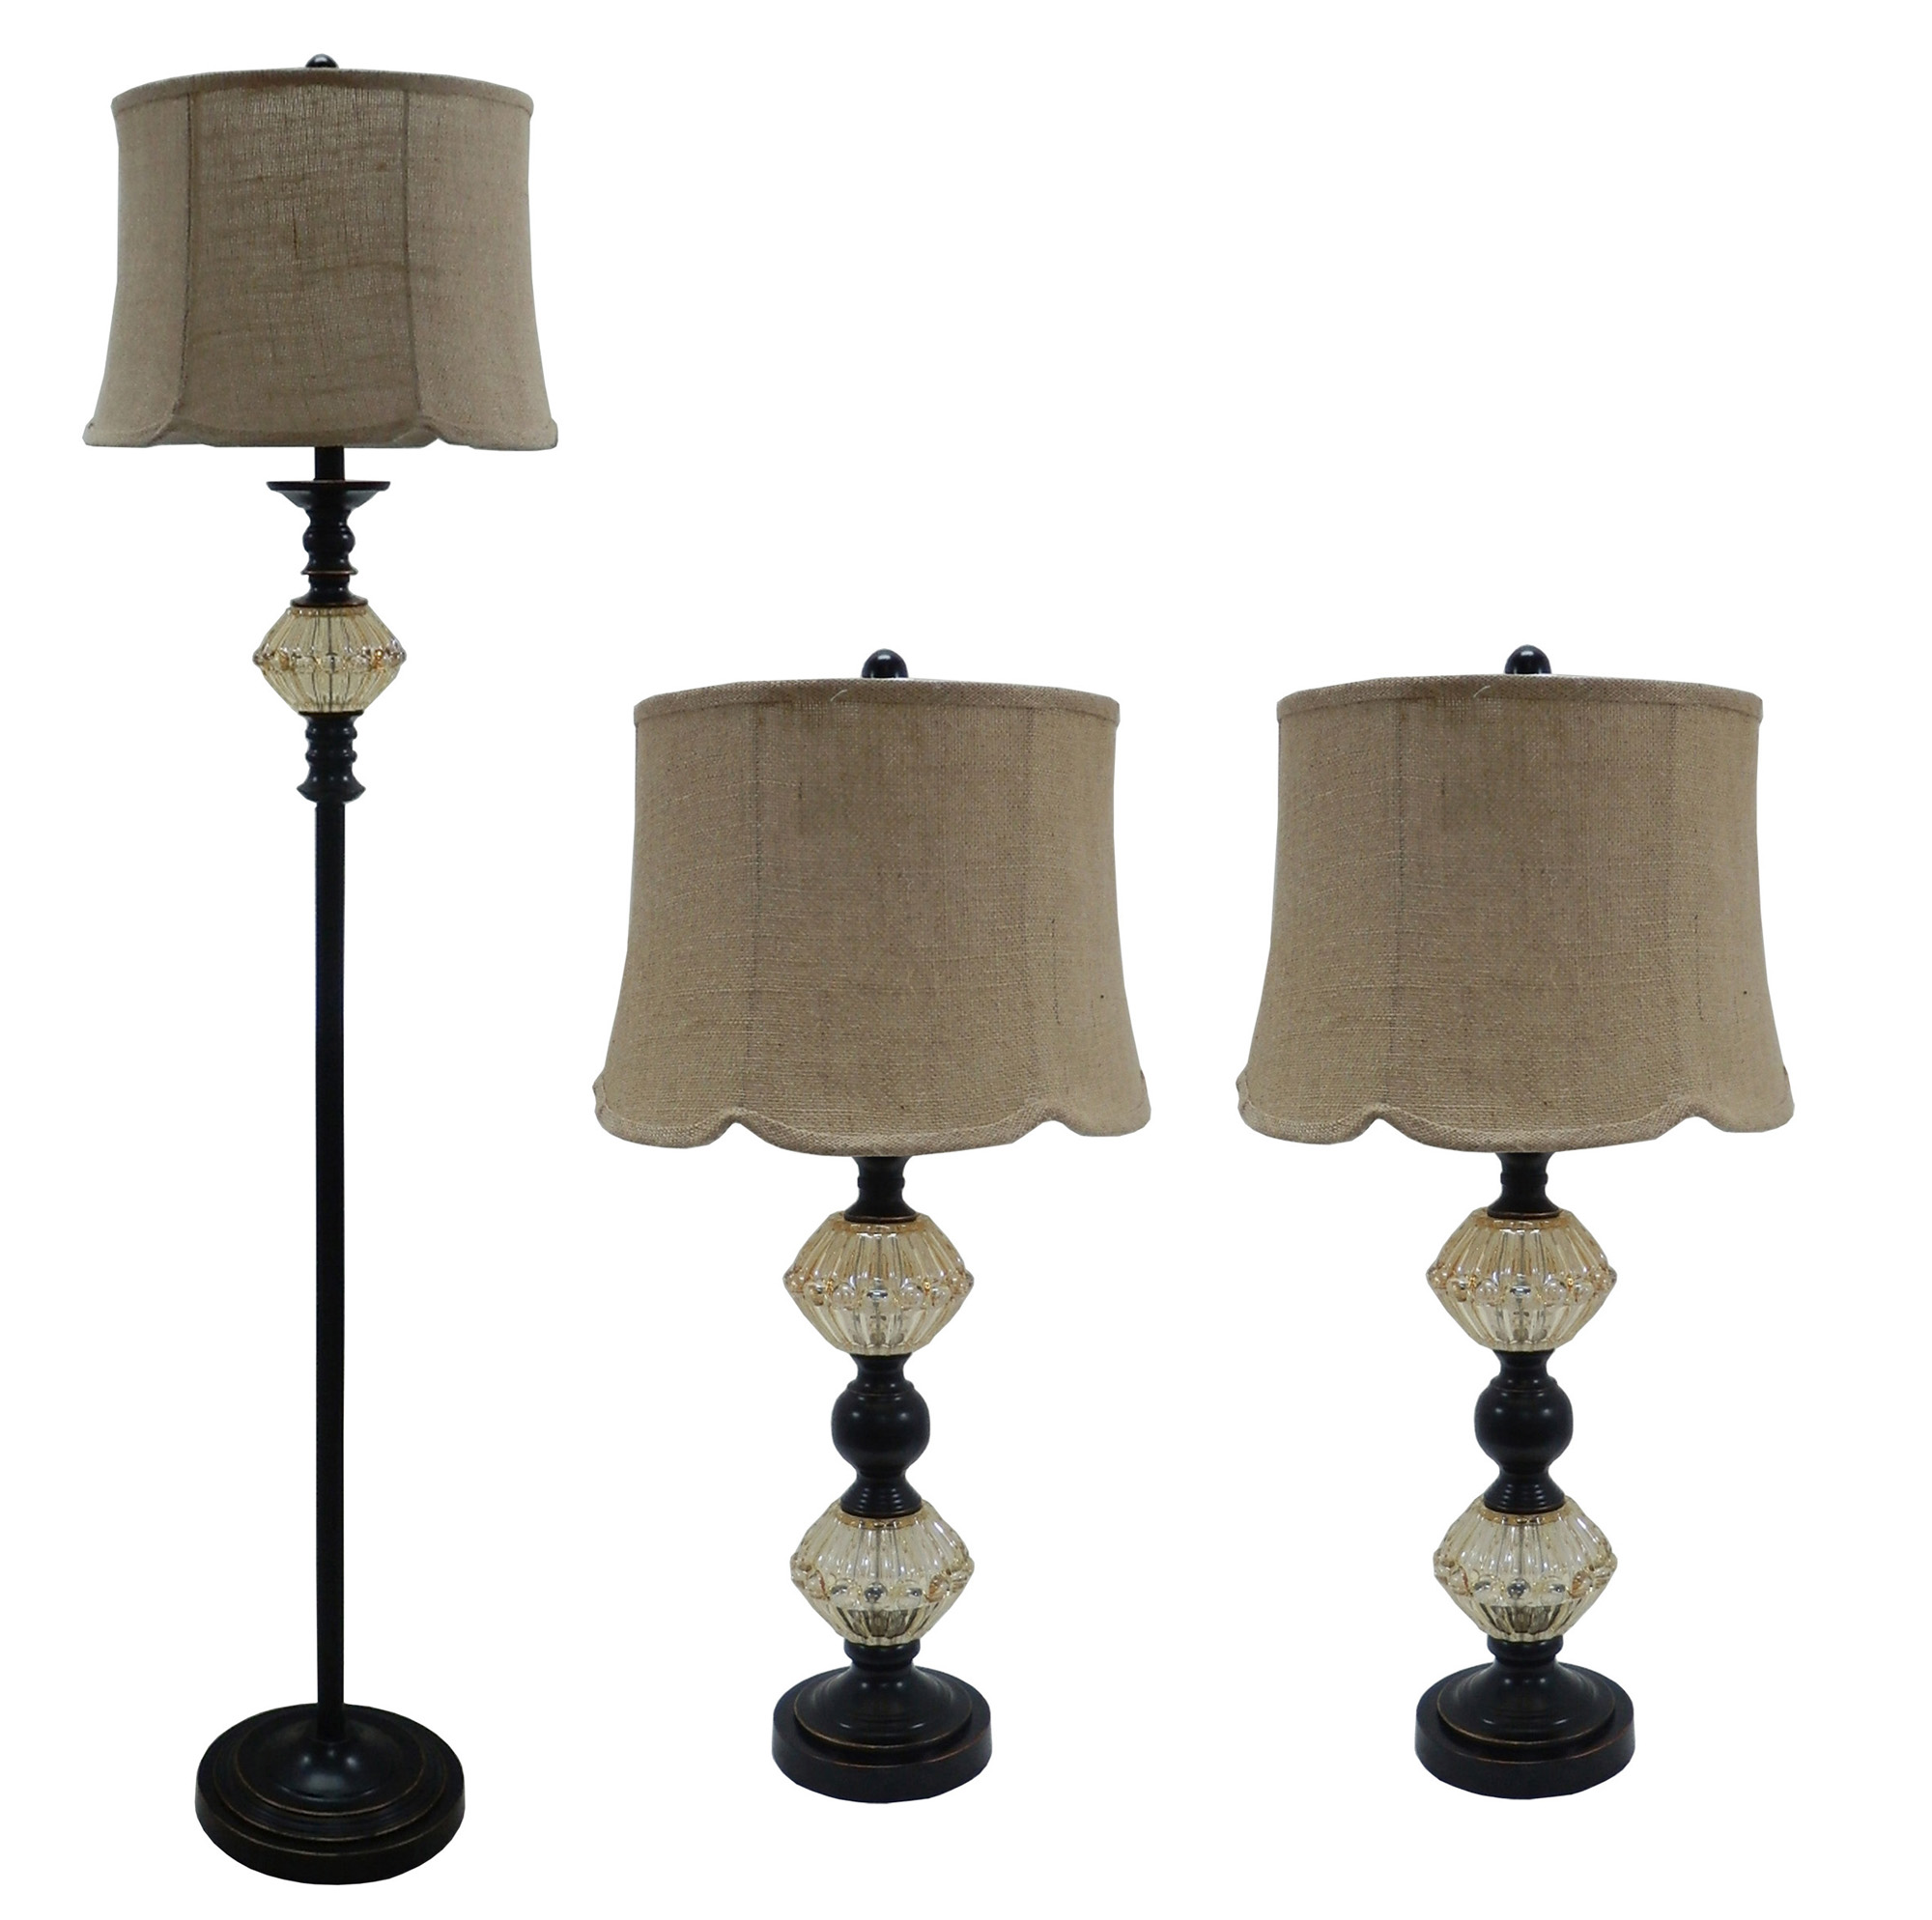 3 Piece Metal & Amber Glass Lamp Set with Bronze Finish.